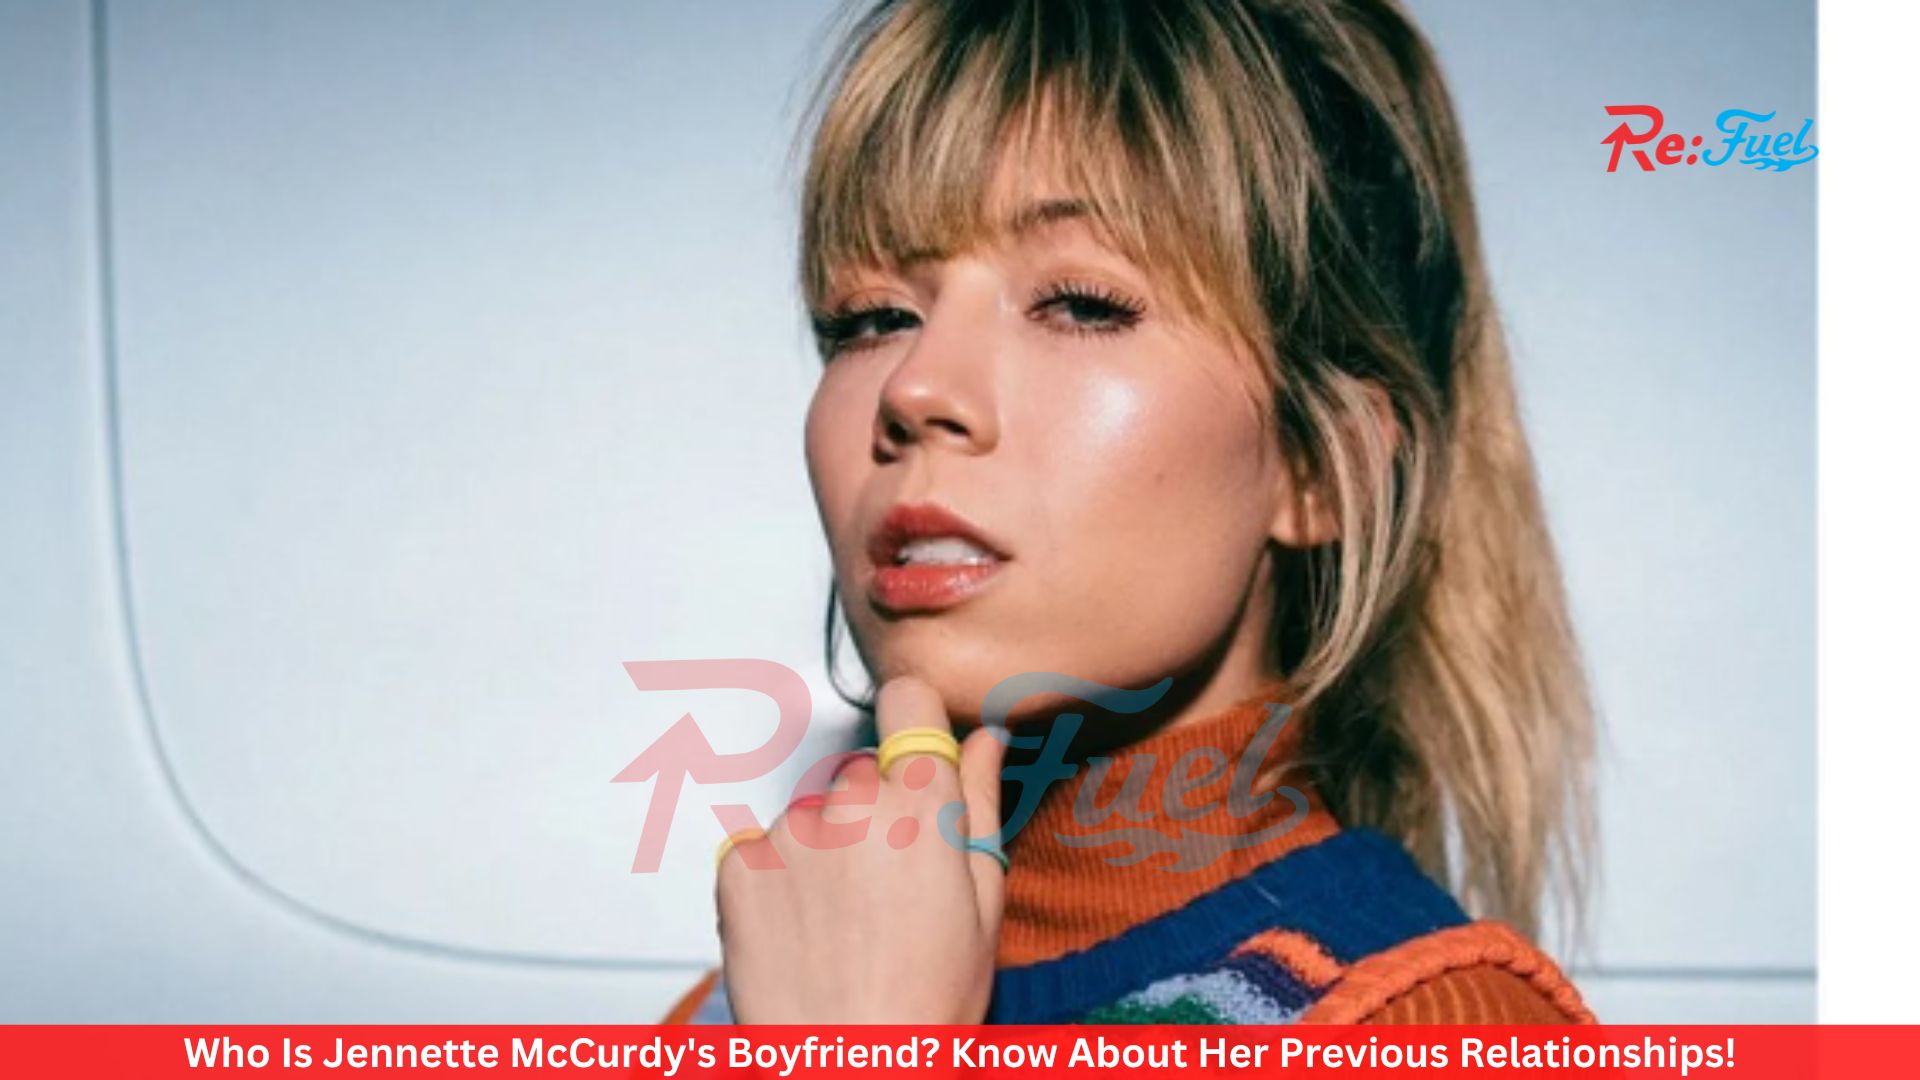 Who Is Jennette McCurdy's Boyfriend? Know About Her Previous Relationships!